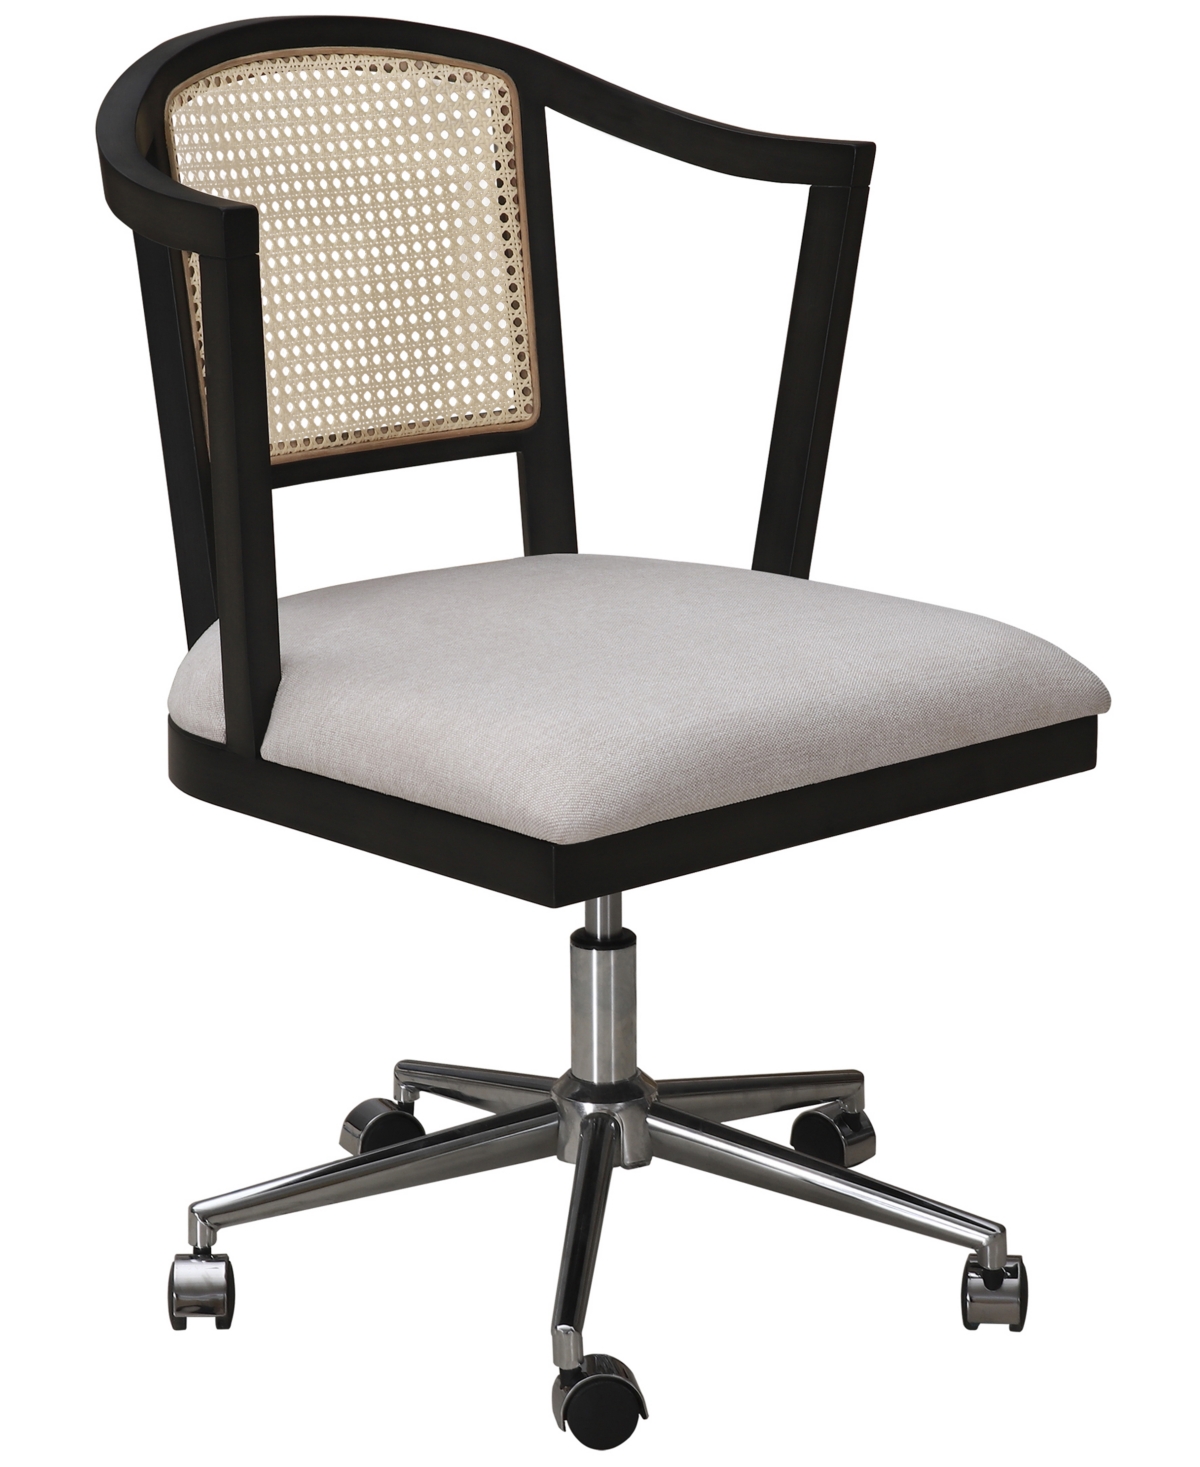 Abbyson Living Archer 34.8" Polyester Two-toned Cane Office Chair In Black With Natural Cane